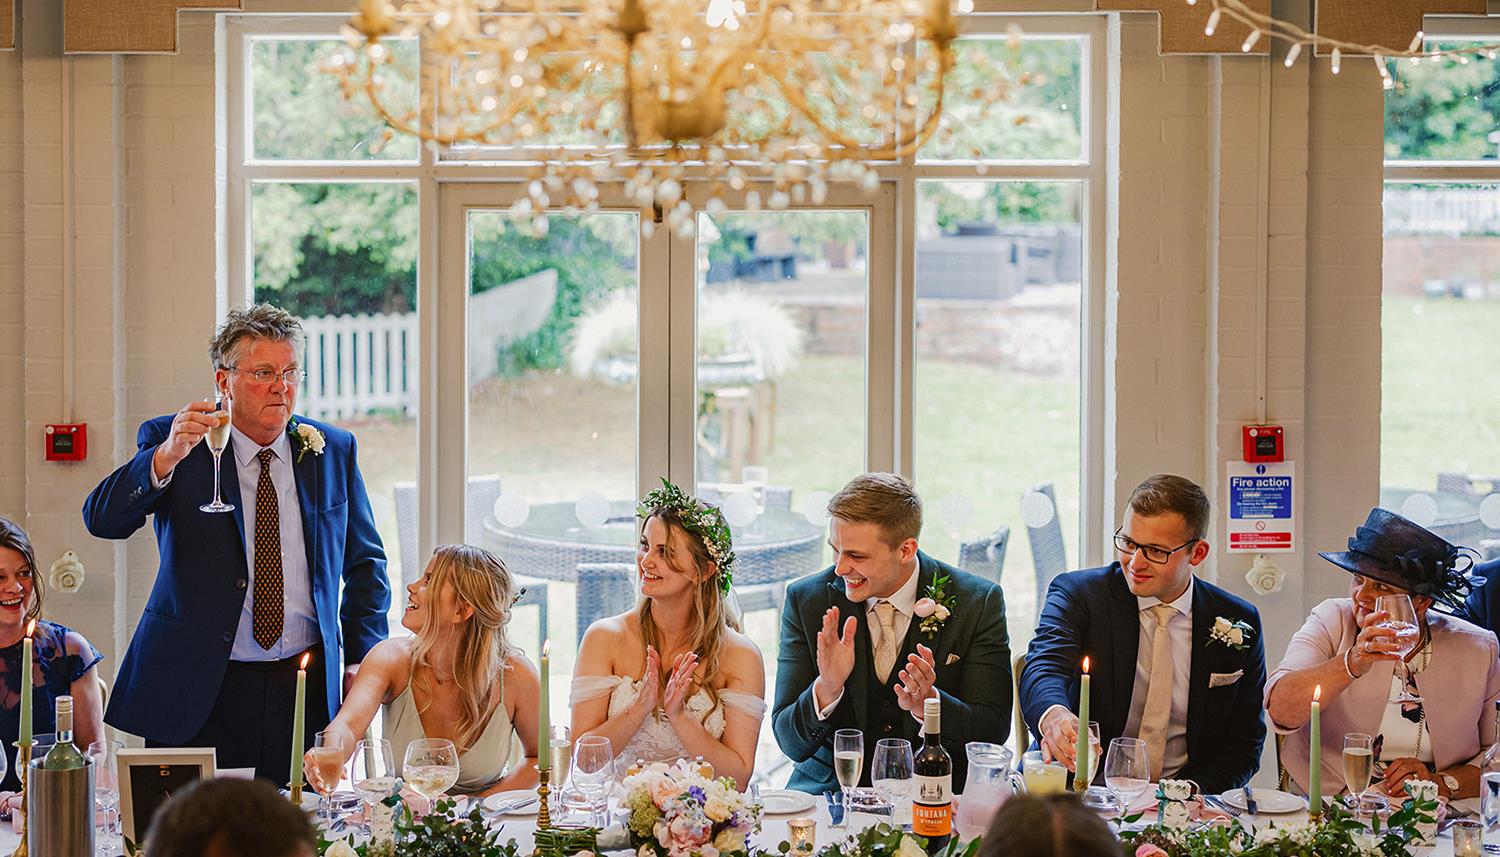 Making a toast. Photo Credit: Philip Quinnell Photography